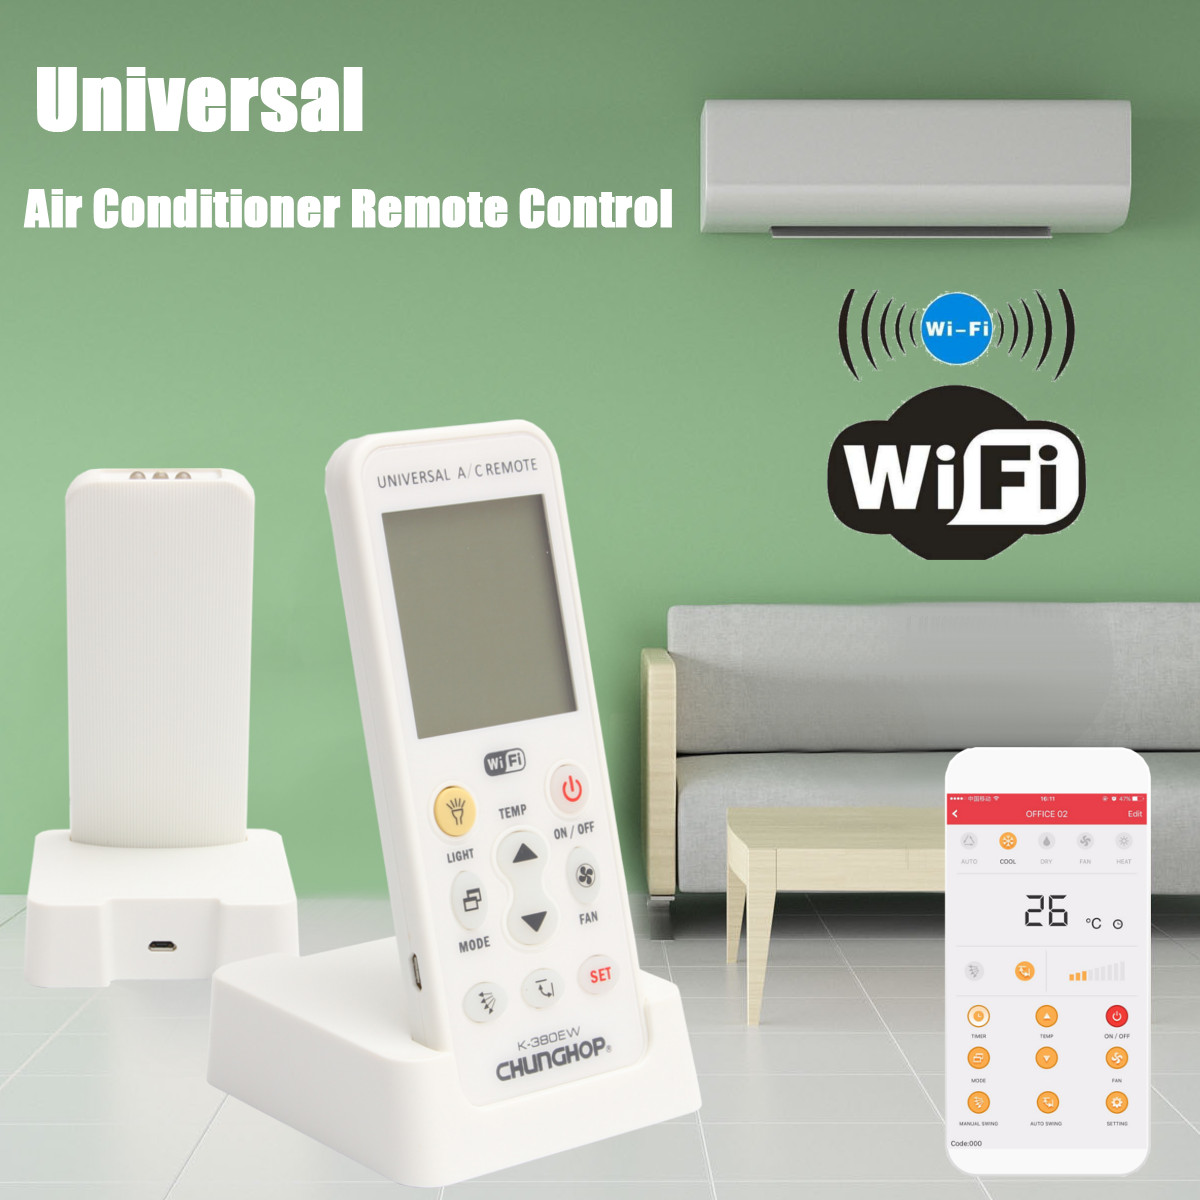 K-380EW-WiFi-Smart-LCD-Air-Conditioner-Remote-Control-with-Holder-Air-Conditioner-Transmitter-1385544-5